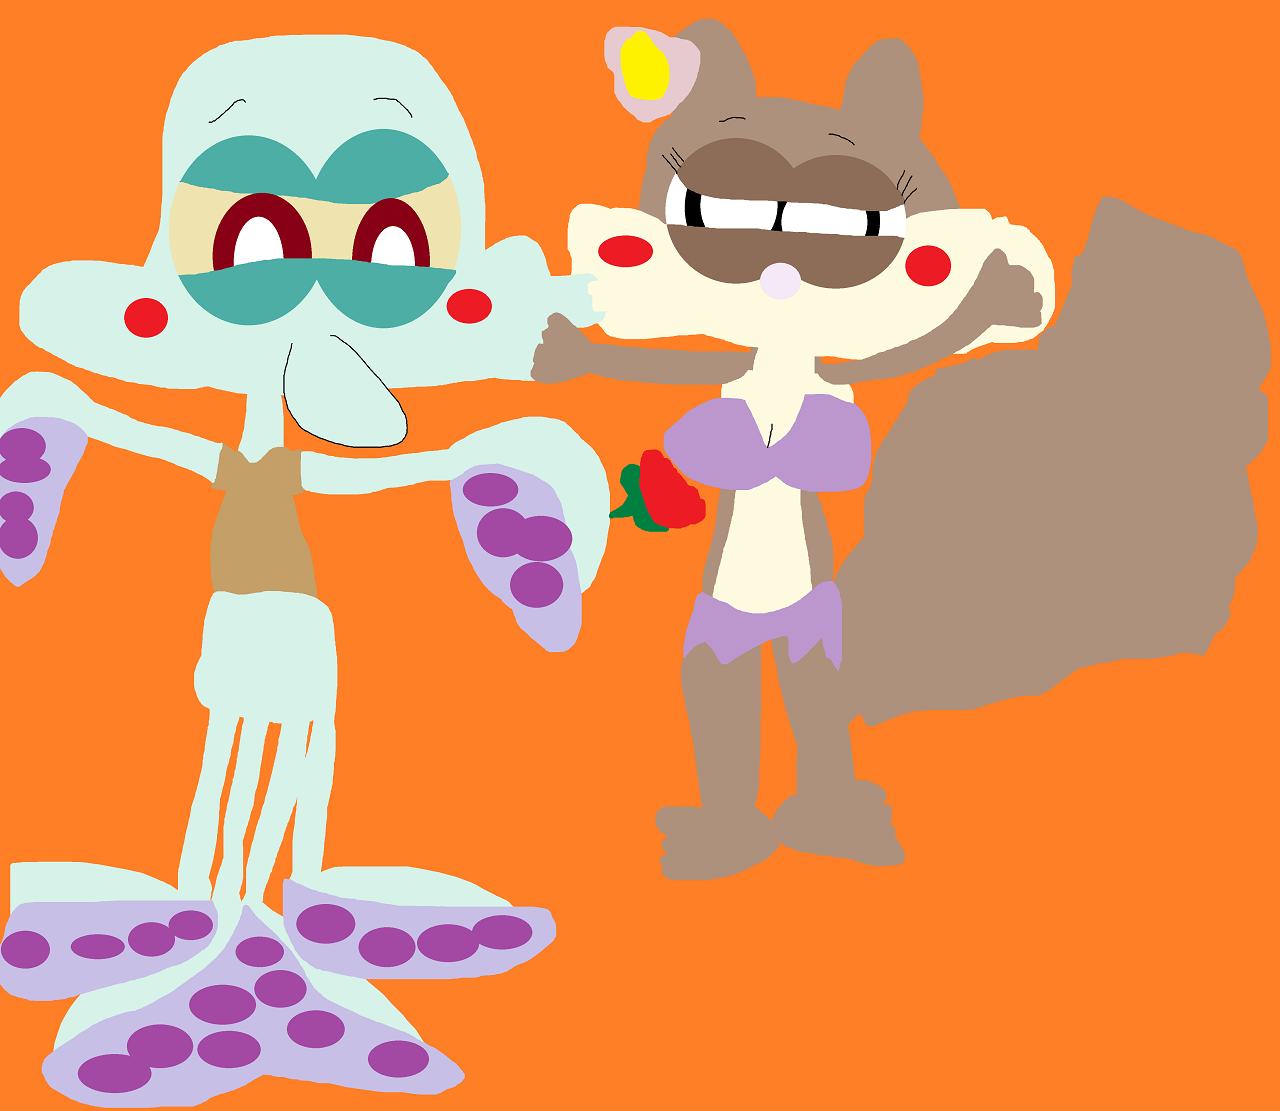 Just Another Random Squidward With A Rose For Sandy Alt by Falconlobo